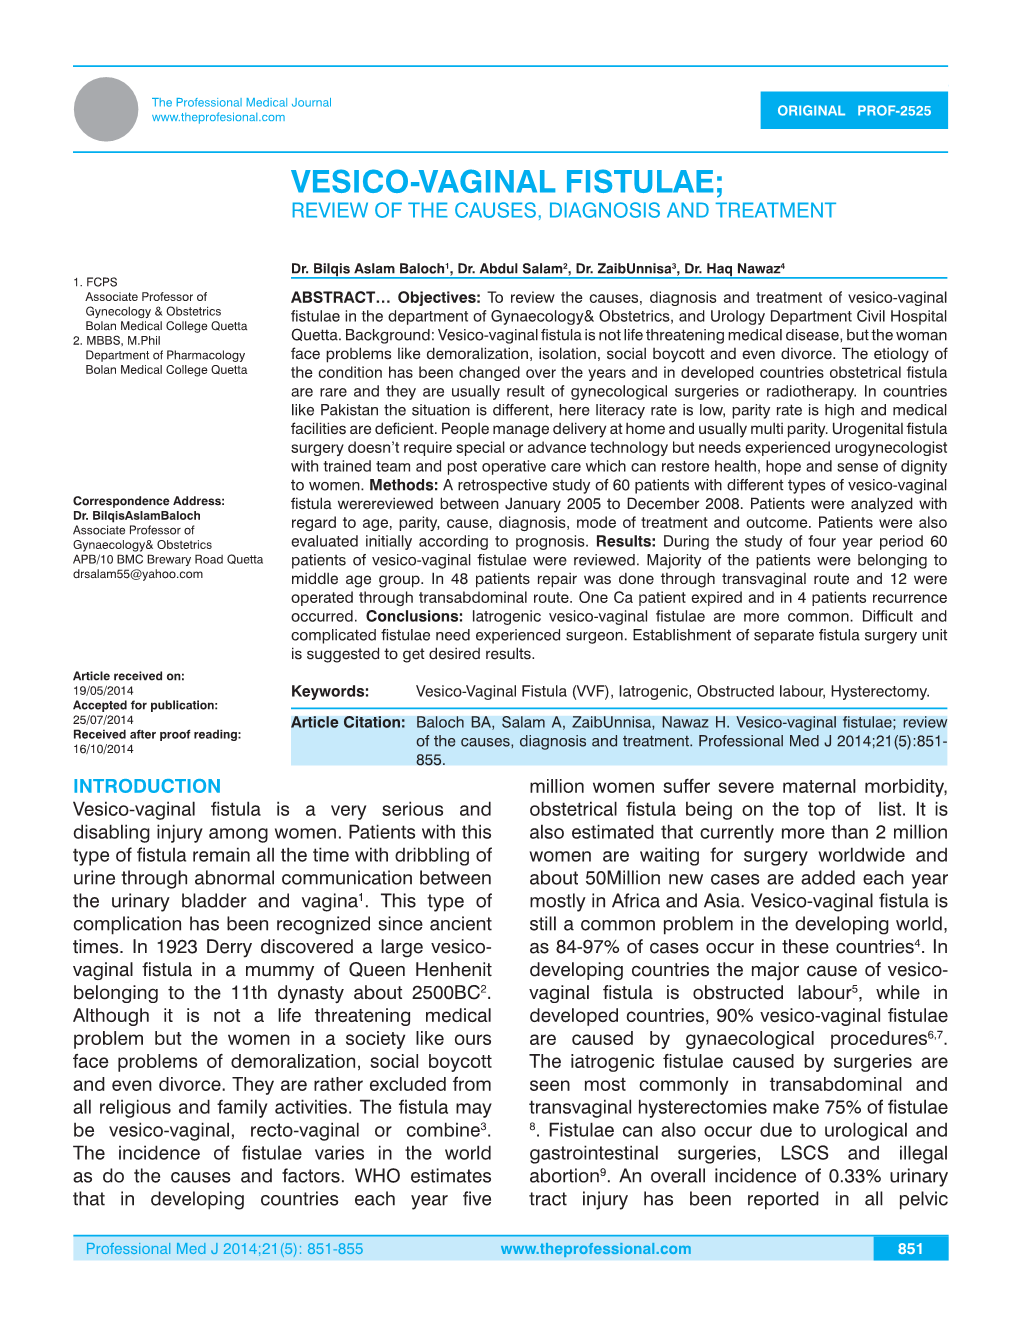 Vesico-Vaginal Fistulae; Review of the Causes, Diagnosis and Treatment